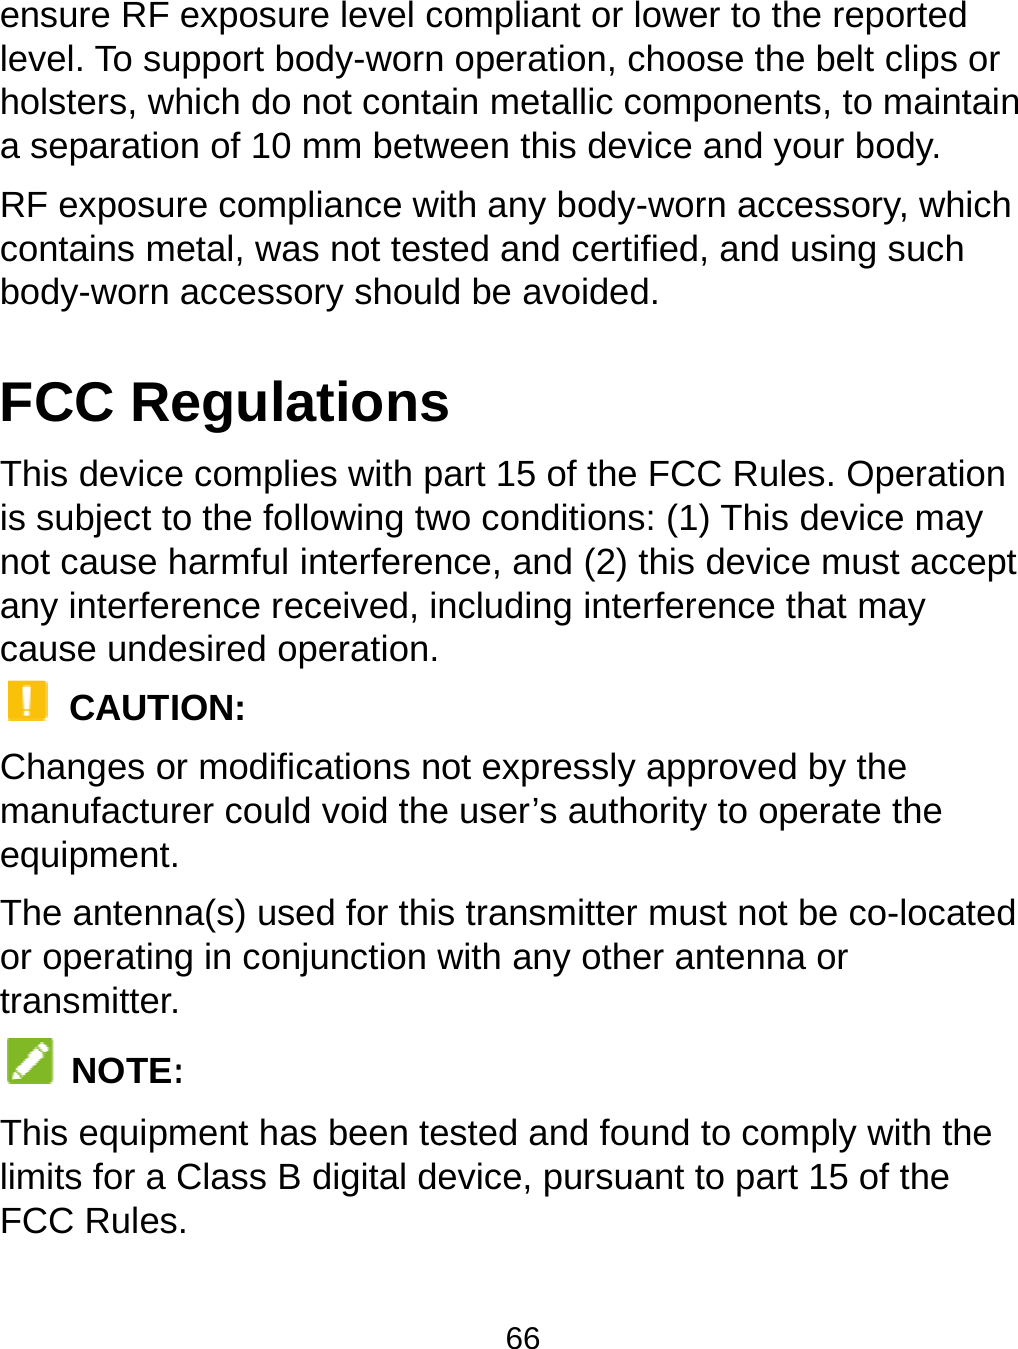  ensure RF level. To suholsters, wha separatioRF exposurcontains mebody-worn FCC ReThis deviceis subject tonot cause hany interfercause unde CAUTIChanges ormanufacturequipment.The antennor operatingtransmitter. NOTE:This equipmlimits for a CFCC Rulesexposure level cupport body-wornhich do not contan of 10 mm betwre compliance wetal, was not tesaccessory shoulegulationse complies with po the following twharmful interferenrence received, iesired operation.ON: r modifications nrer could void the na(s) used for thisg in conjunction w : ment has been teClass B digital de.  66 compliant or lowen operation, chooain metallic compween this device ith any body-worted and certifiedd be avoided. s part 15 of the FCCwo conditions: (1)nce, and (2) this ncluding interfereot expressly appe user’s authoritys transmitter muswith any other anested and found evice, pursuant ter to the reportedose the belt clips ponents, to mainand your body. rn accessory, wh, and using suchC Rules. Operati) This device madevice must accence that may proved by the y to operate the st not be co-locantenna or to comply with thto part 15 of the d or tain hich  ion ay cept ated he 